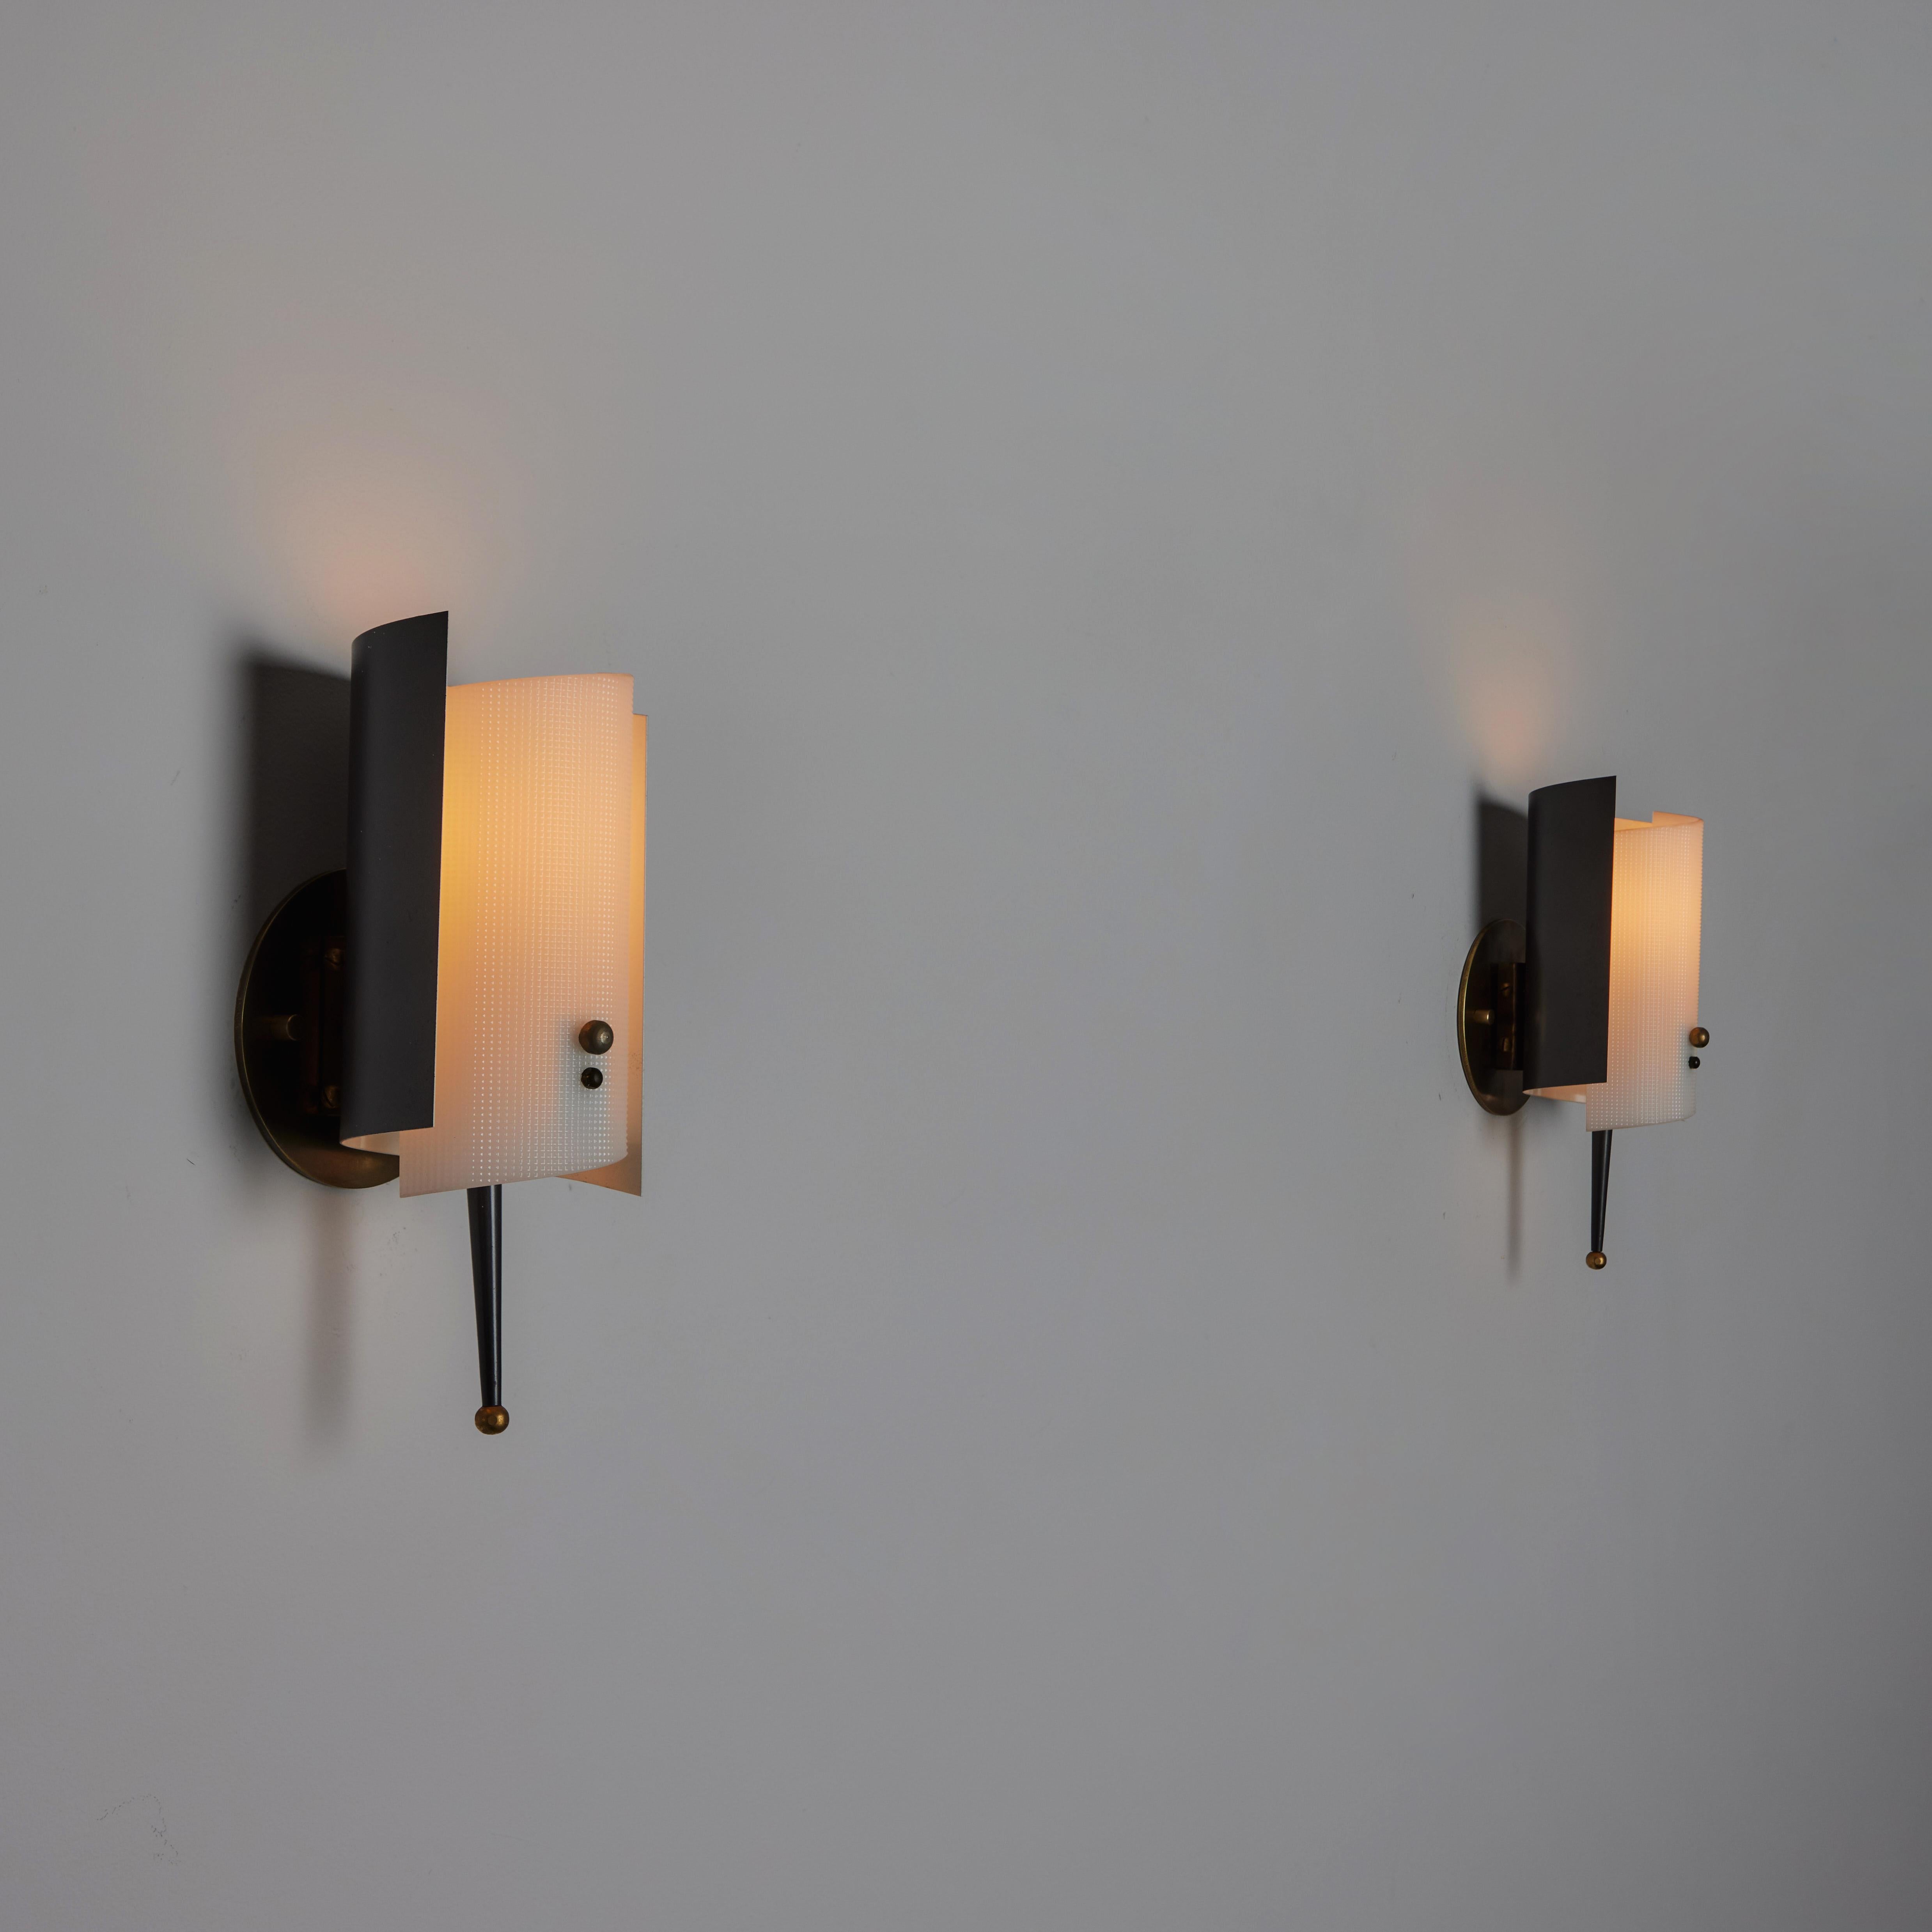 Pair of Sconces by Jacques Biny made in France, c.1950s. Featuring a curved metal enameled back with a white textured plexiglass diffuser, decorative spikes and brass details. Holds one E14 socket type per unit. We recommend one 25-40w bulb. Bulbs